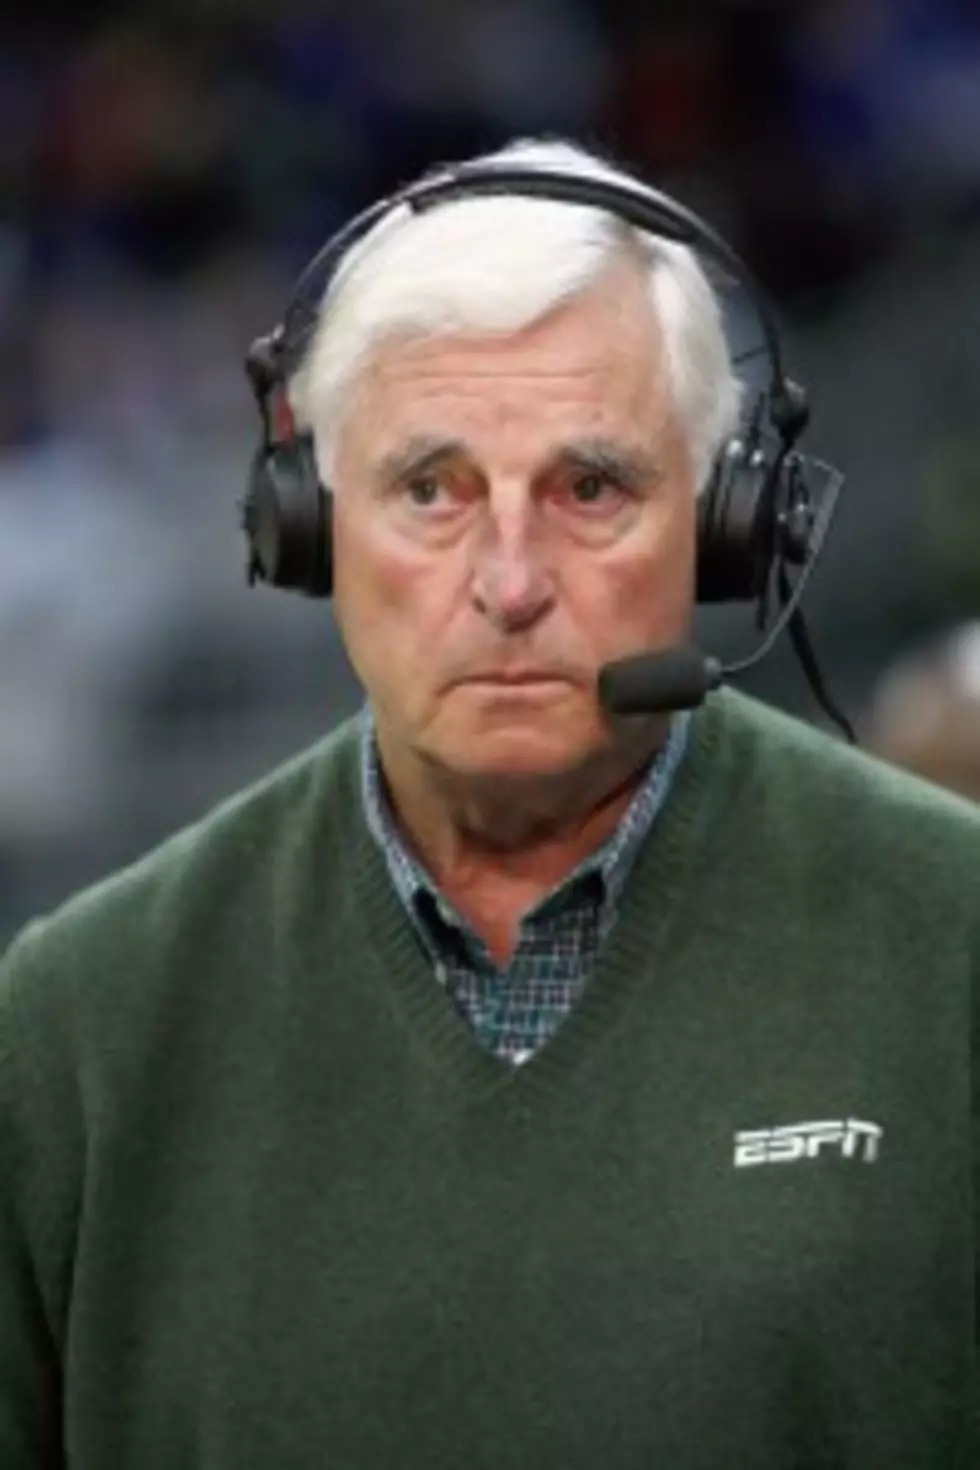 Basketball Analyst Bob Knight Yells at Southern Methodist Fan During Broadcast [Video]